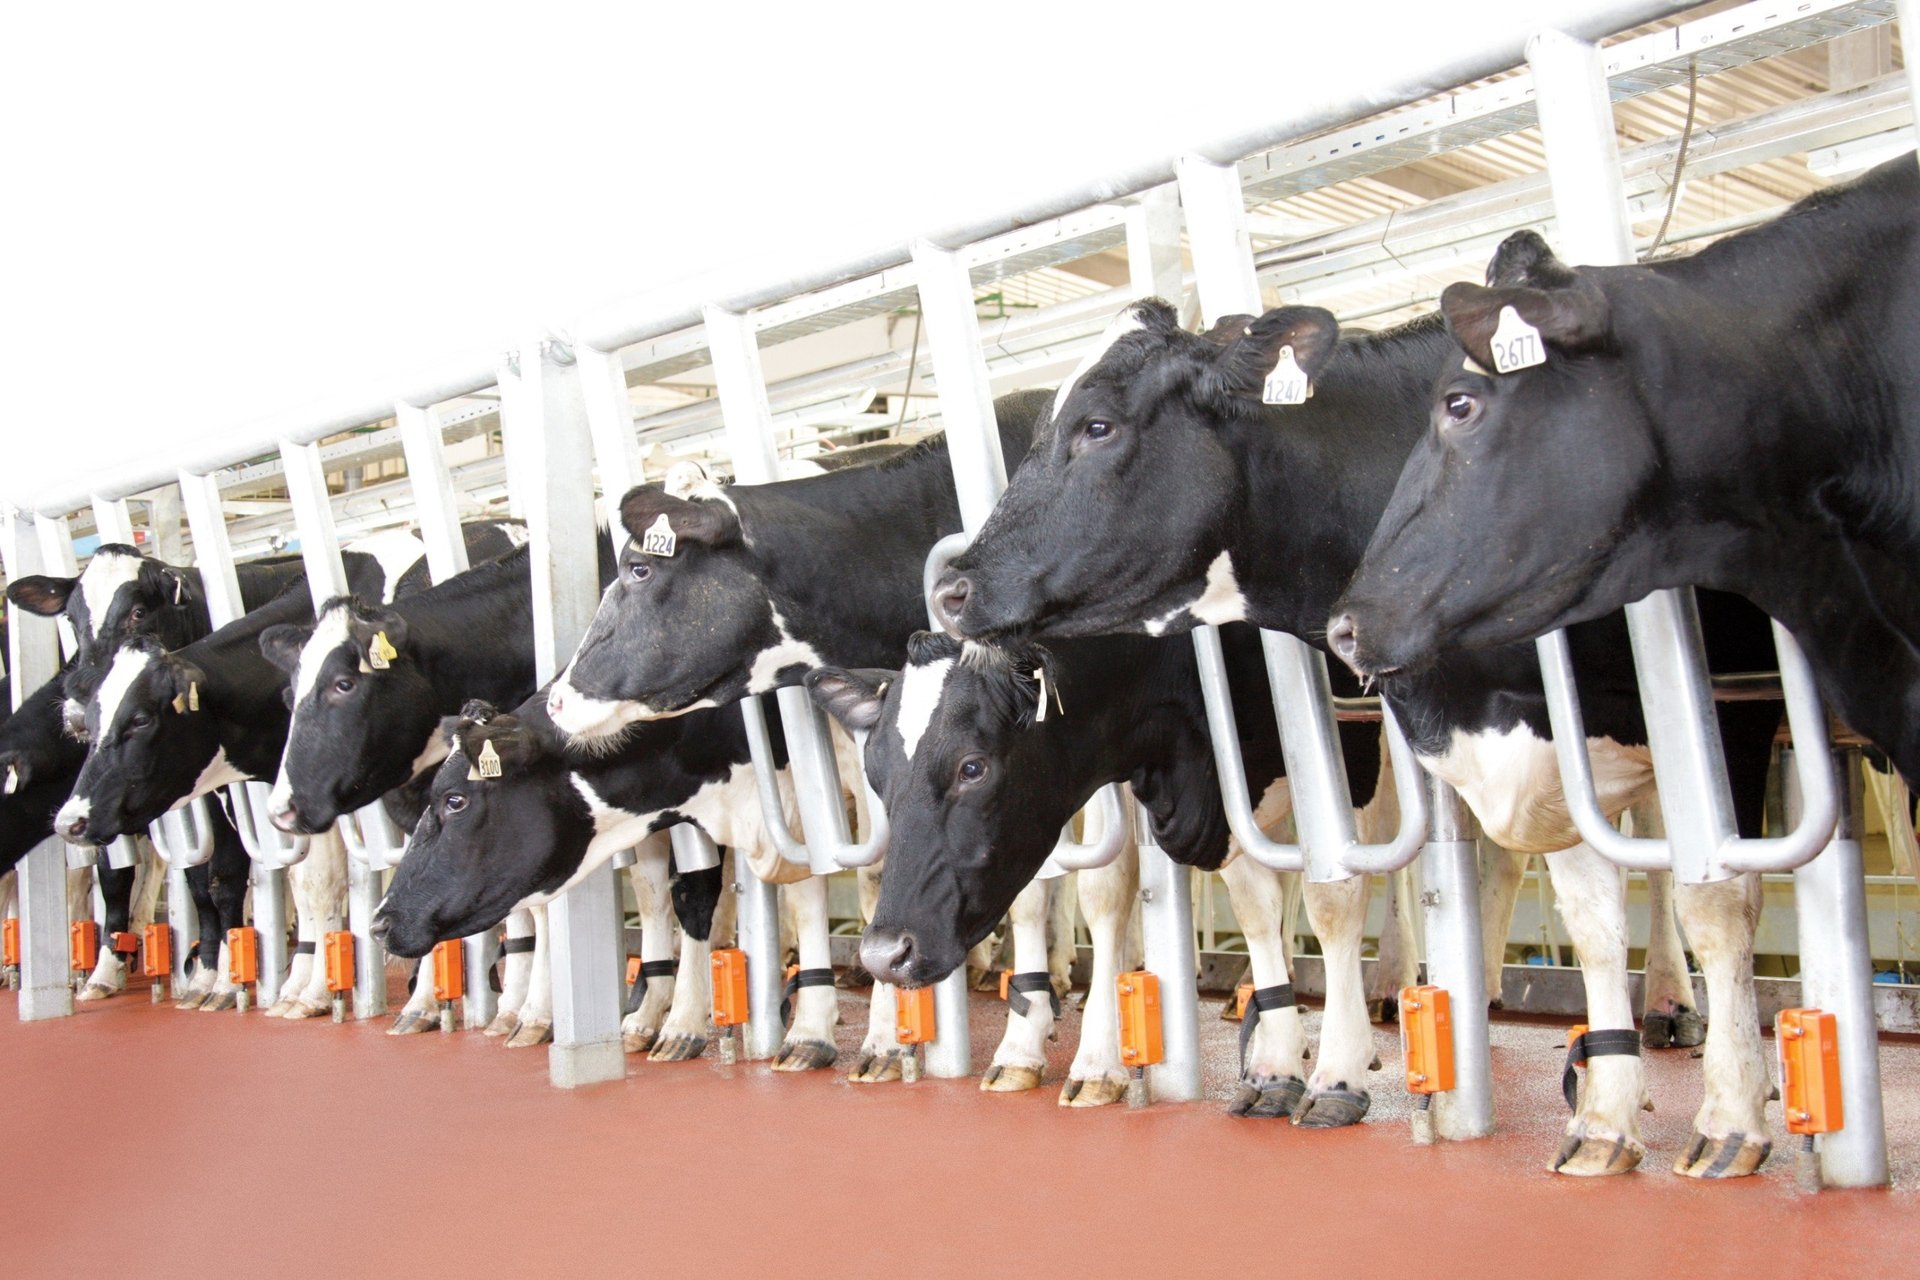 TH's dairy cows achieve one of the highest milk yields in Vietnam and the Southeast Asia, with a daily average yield of 35 liters per cow during the peak season.